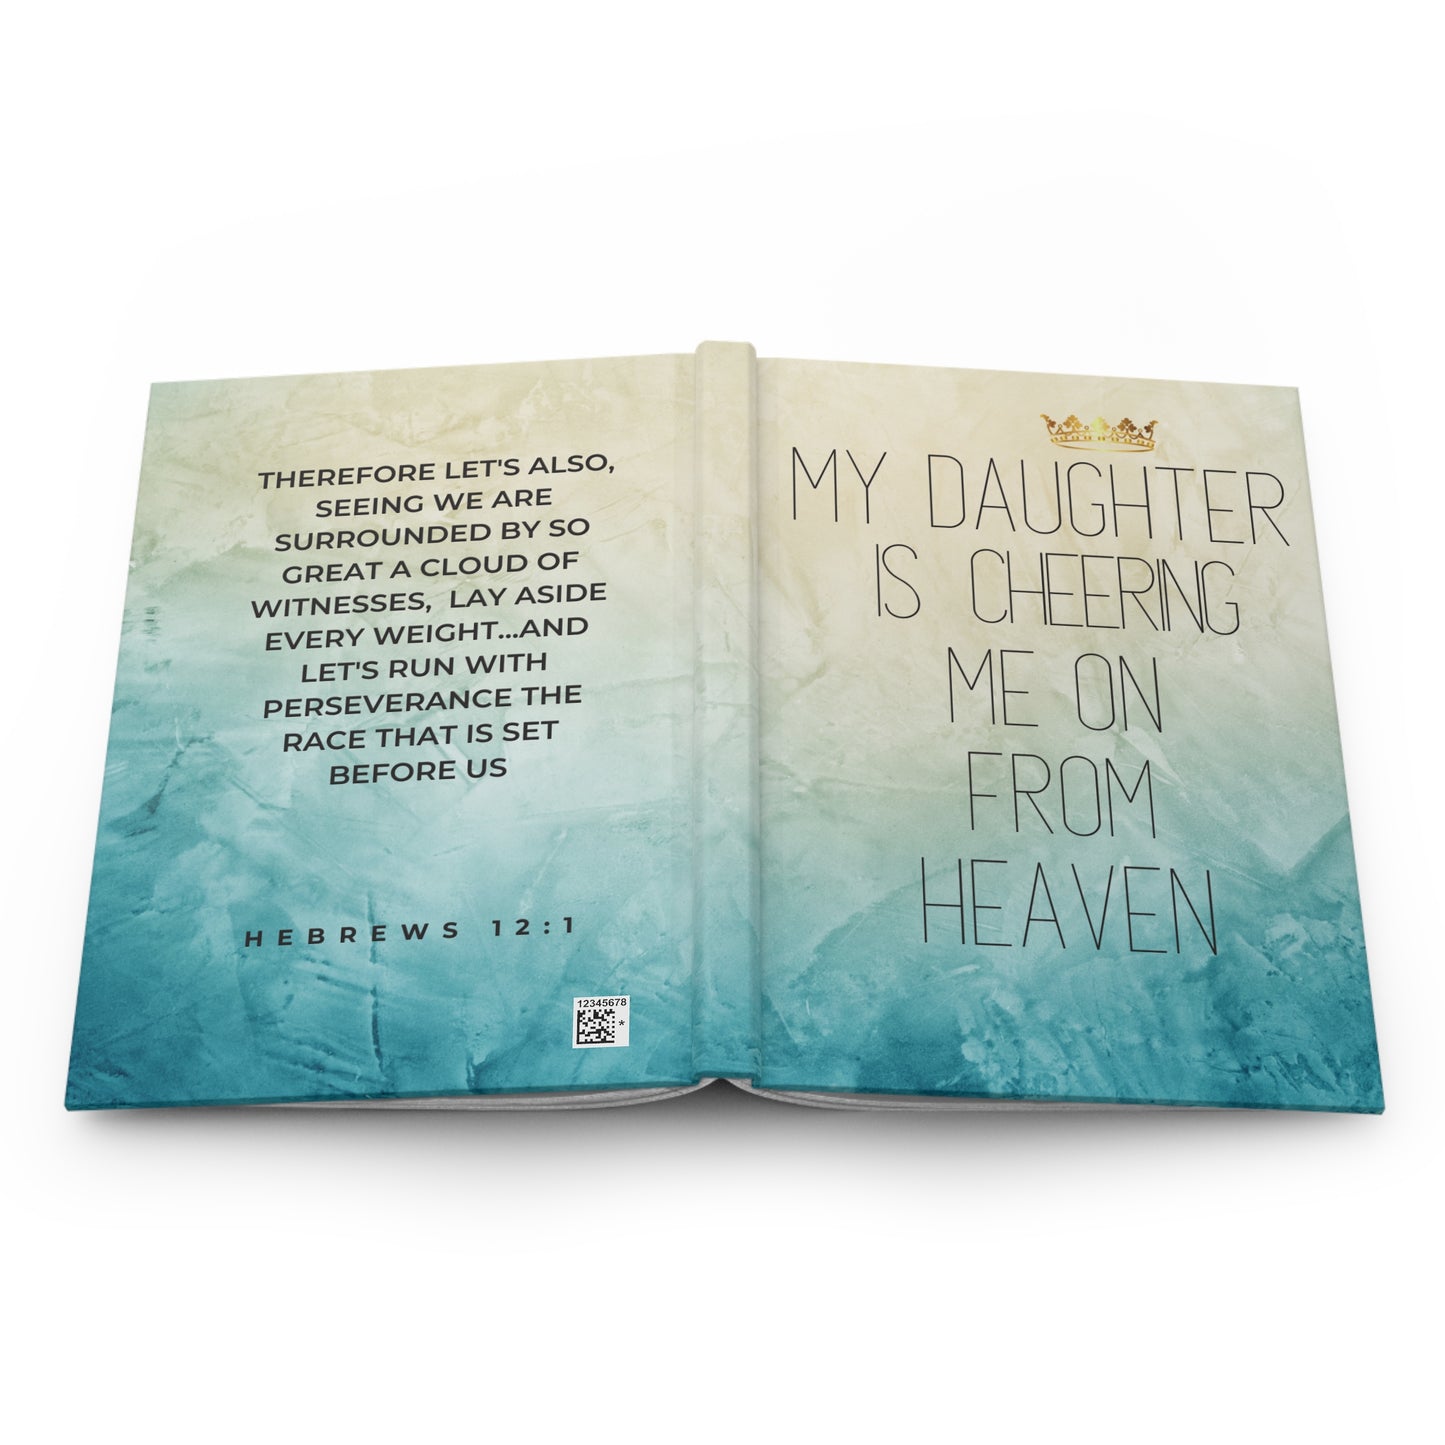 Grief Journal for Loss of Daughter, Cheering Me On From Heaven